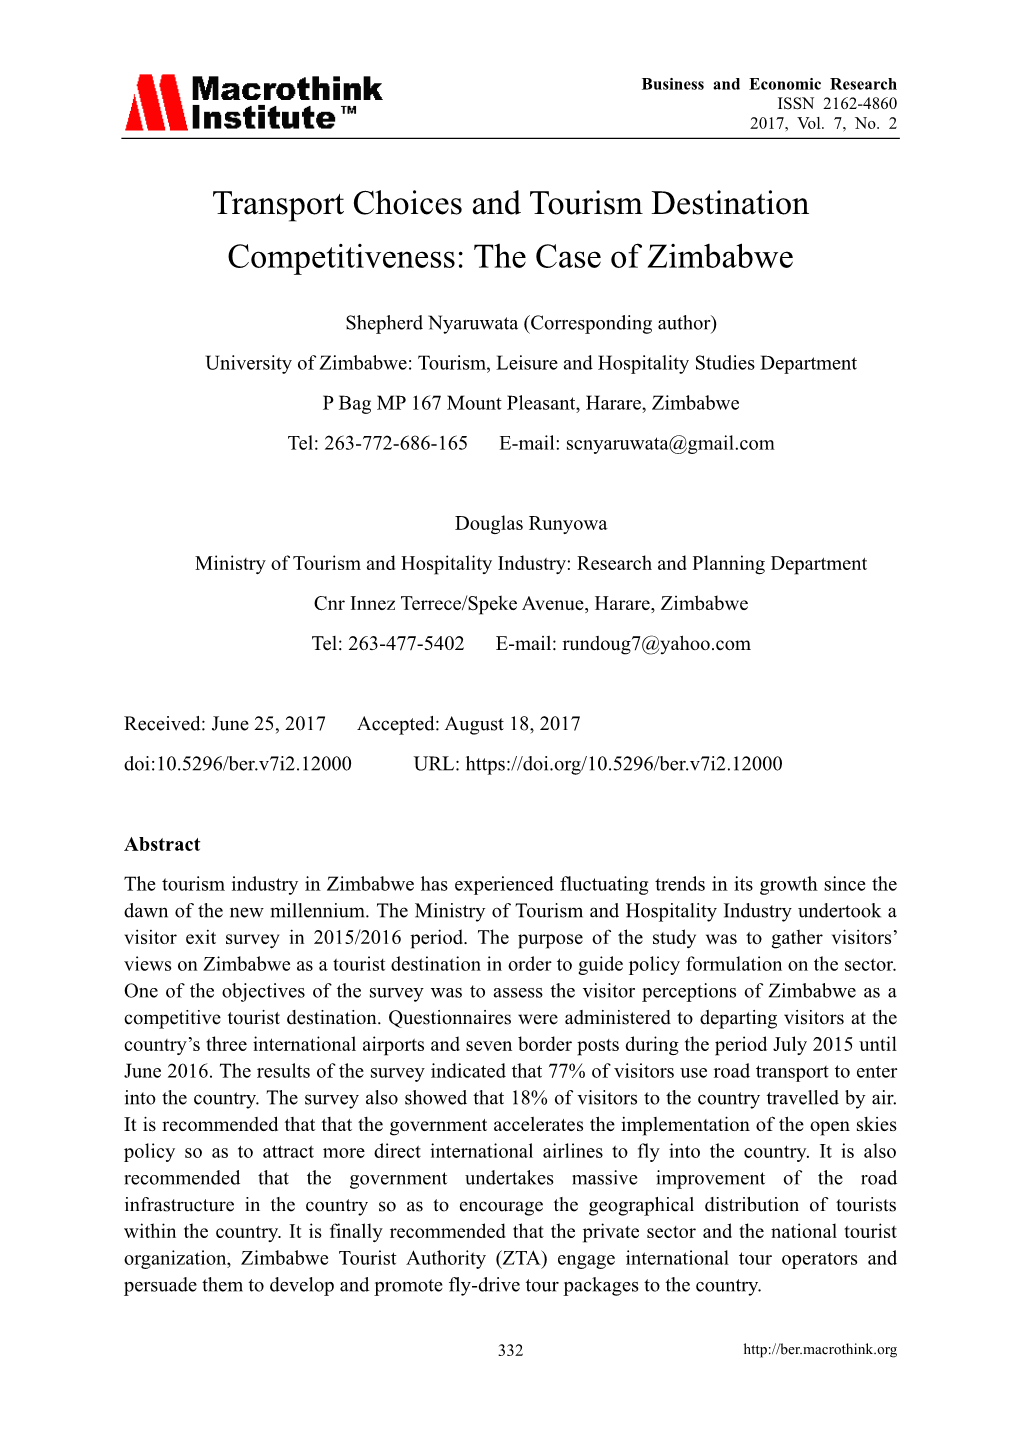 Transport Choices and Tourism Destination Competitiveness: the Case of Zimbabwe